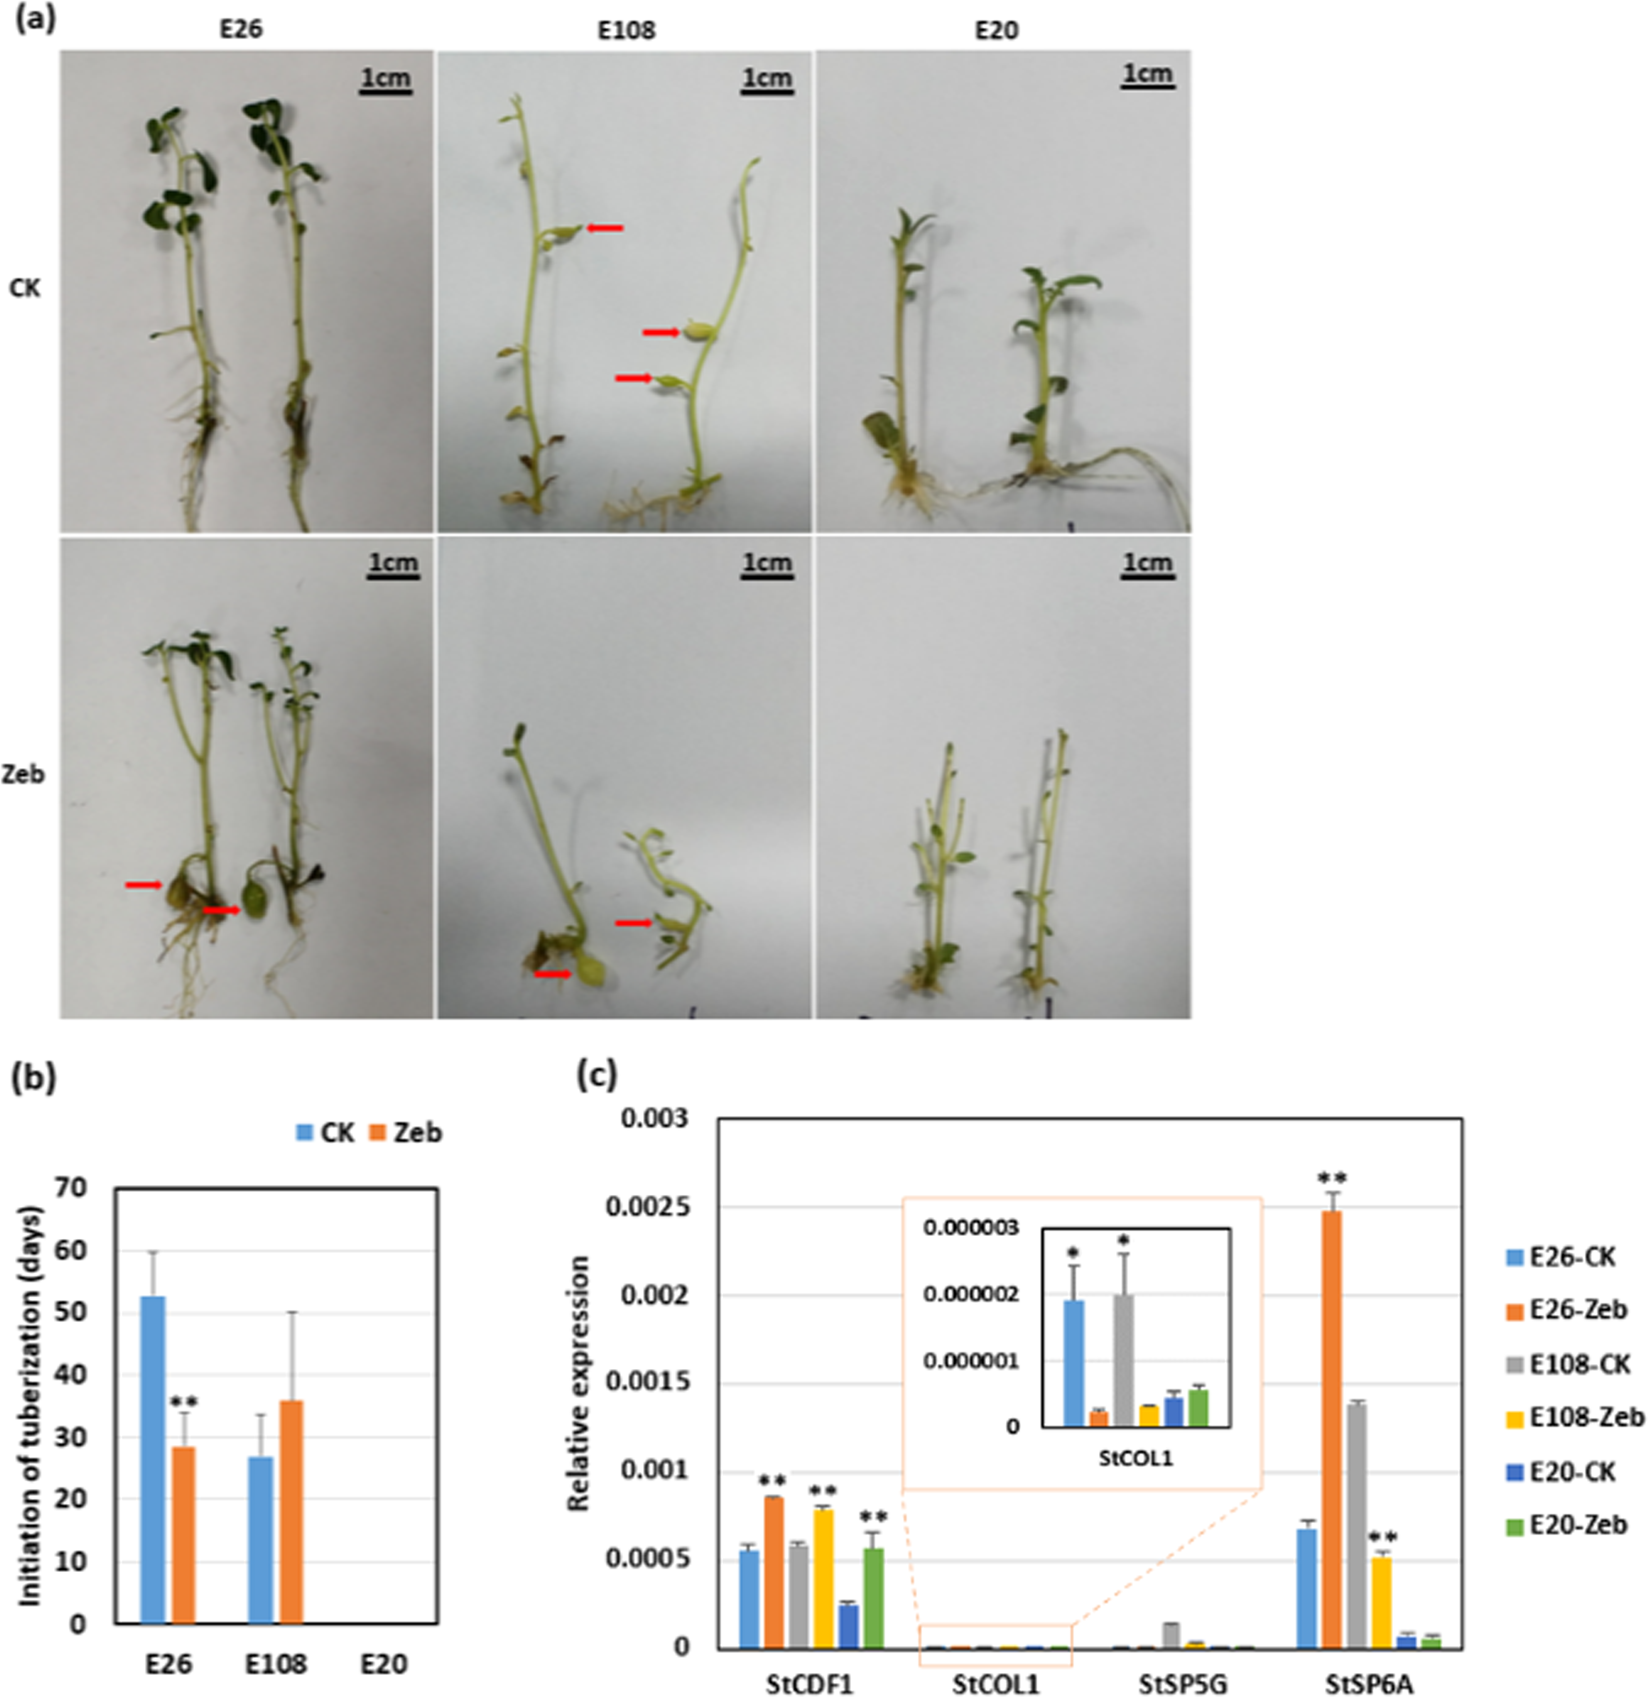 DNA methylation affects photoperiodic tuberization in potato (Solanum tuberosum L.) by mediating the expression of genes related to the photoperiod and GA pathways Horticulture Research